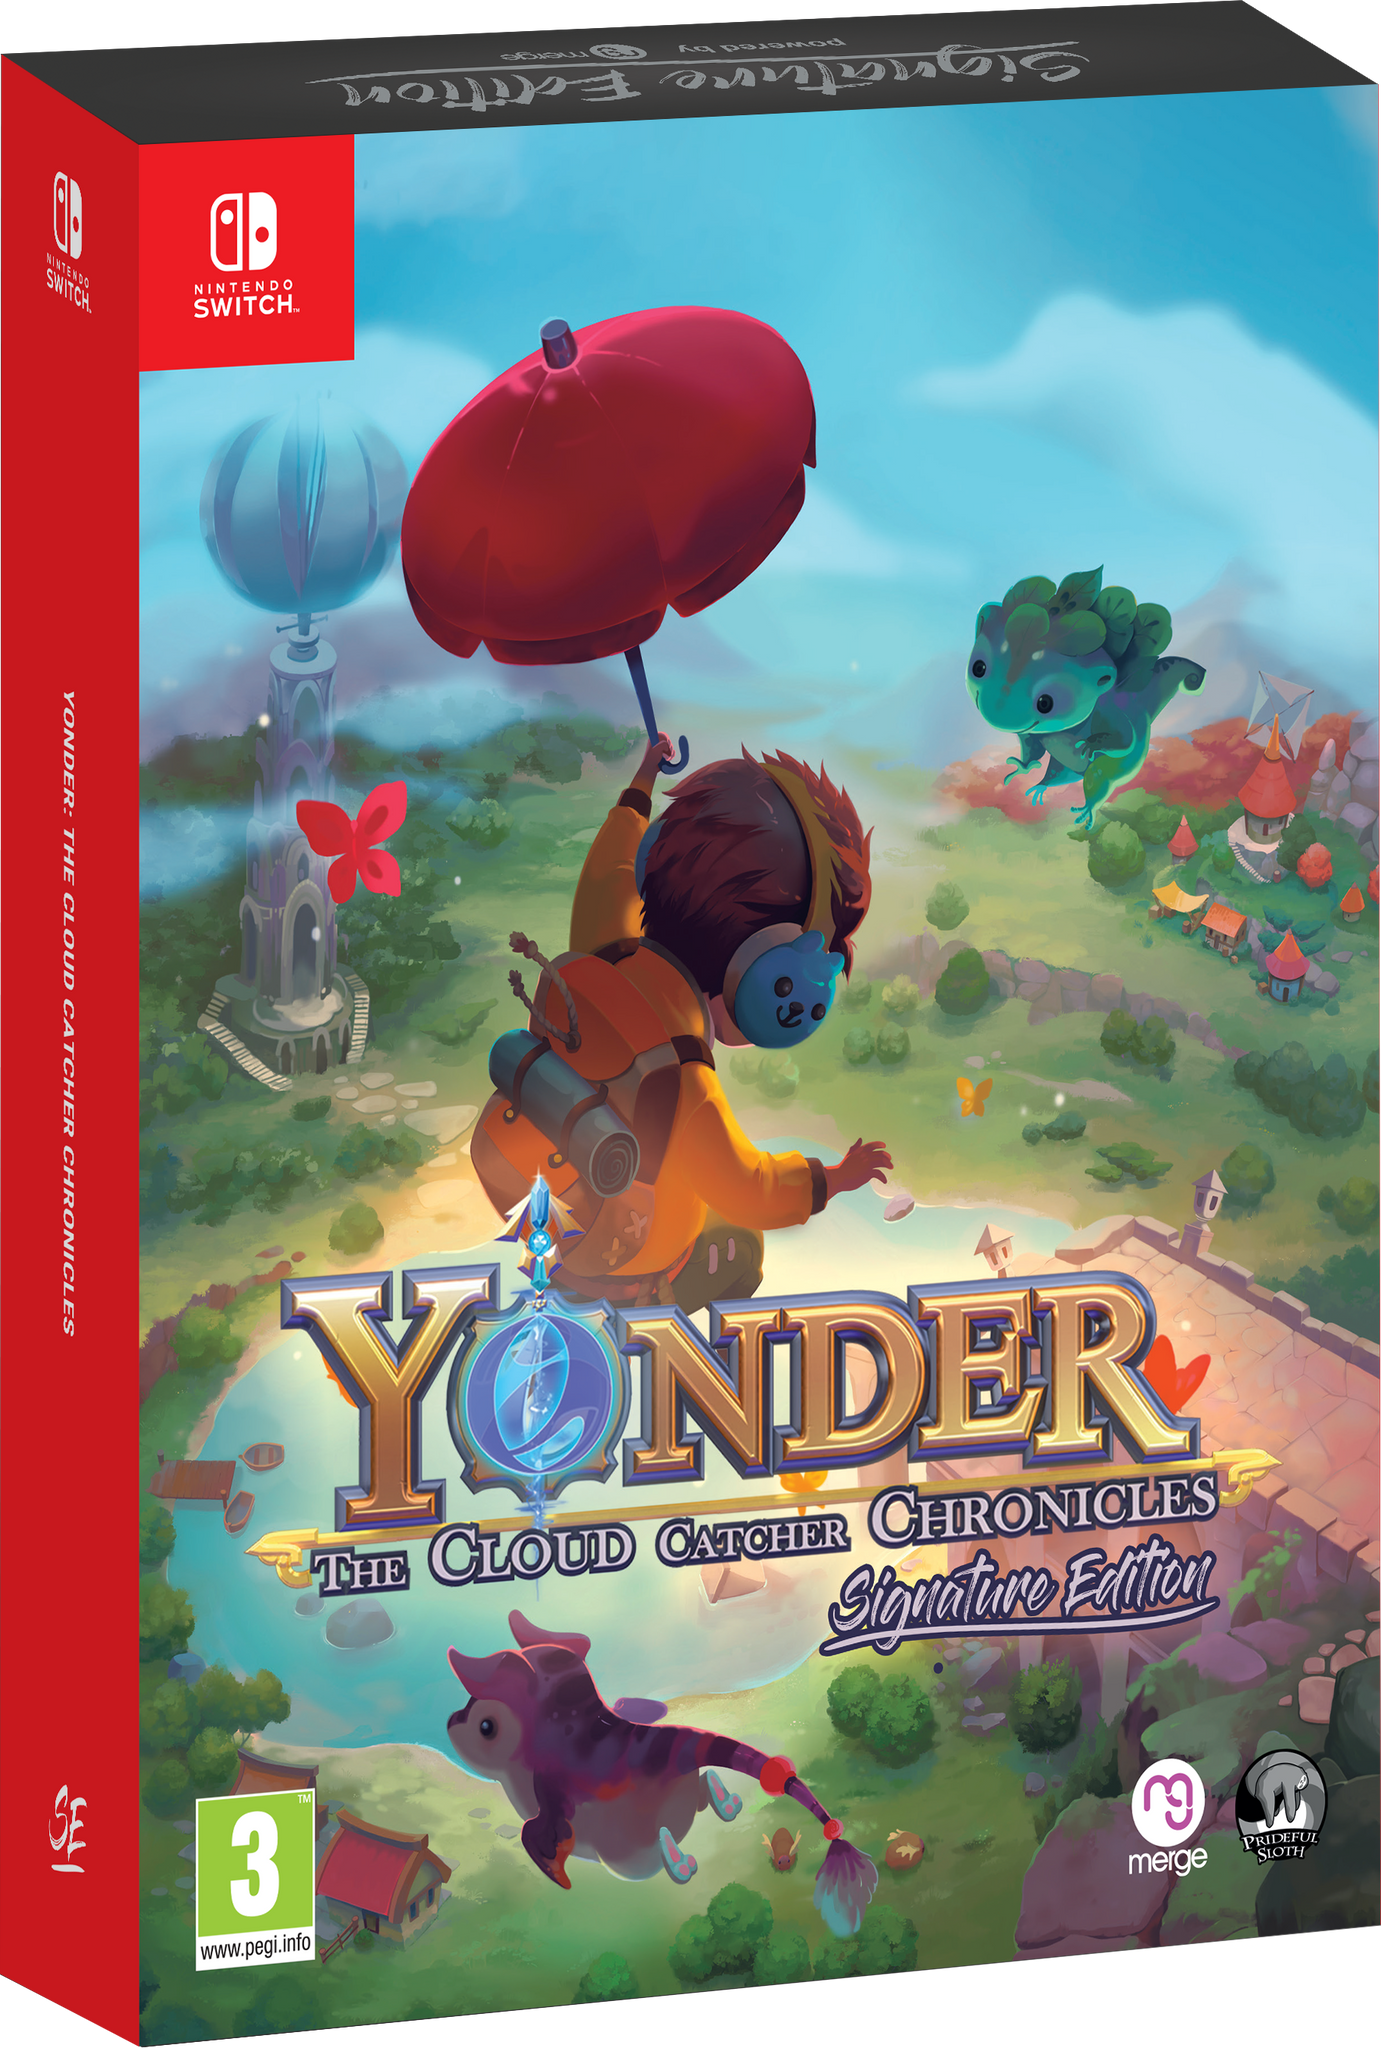 Yonder: The Cloud Catcher Chronicles - New Signature (Switch) – Signature Edition